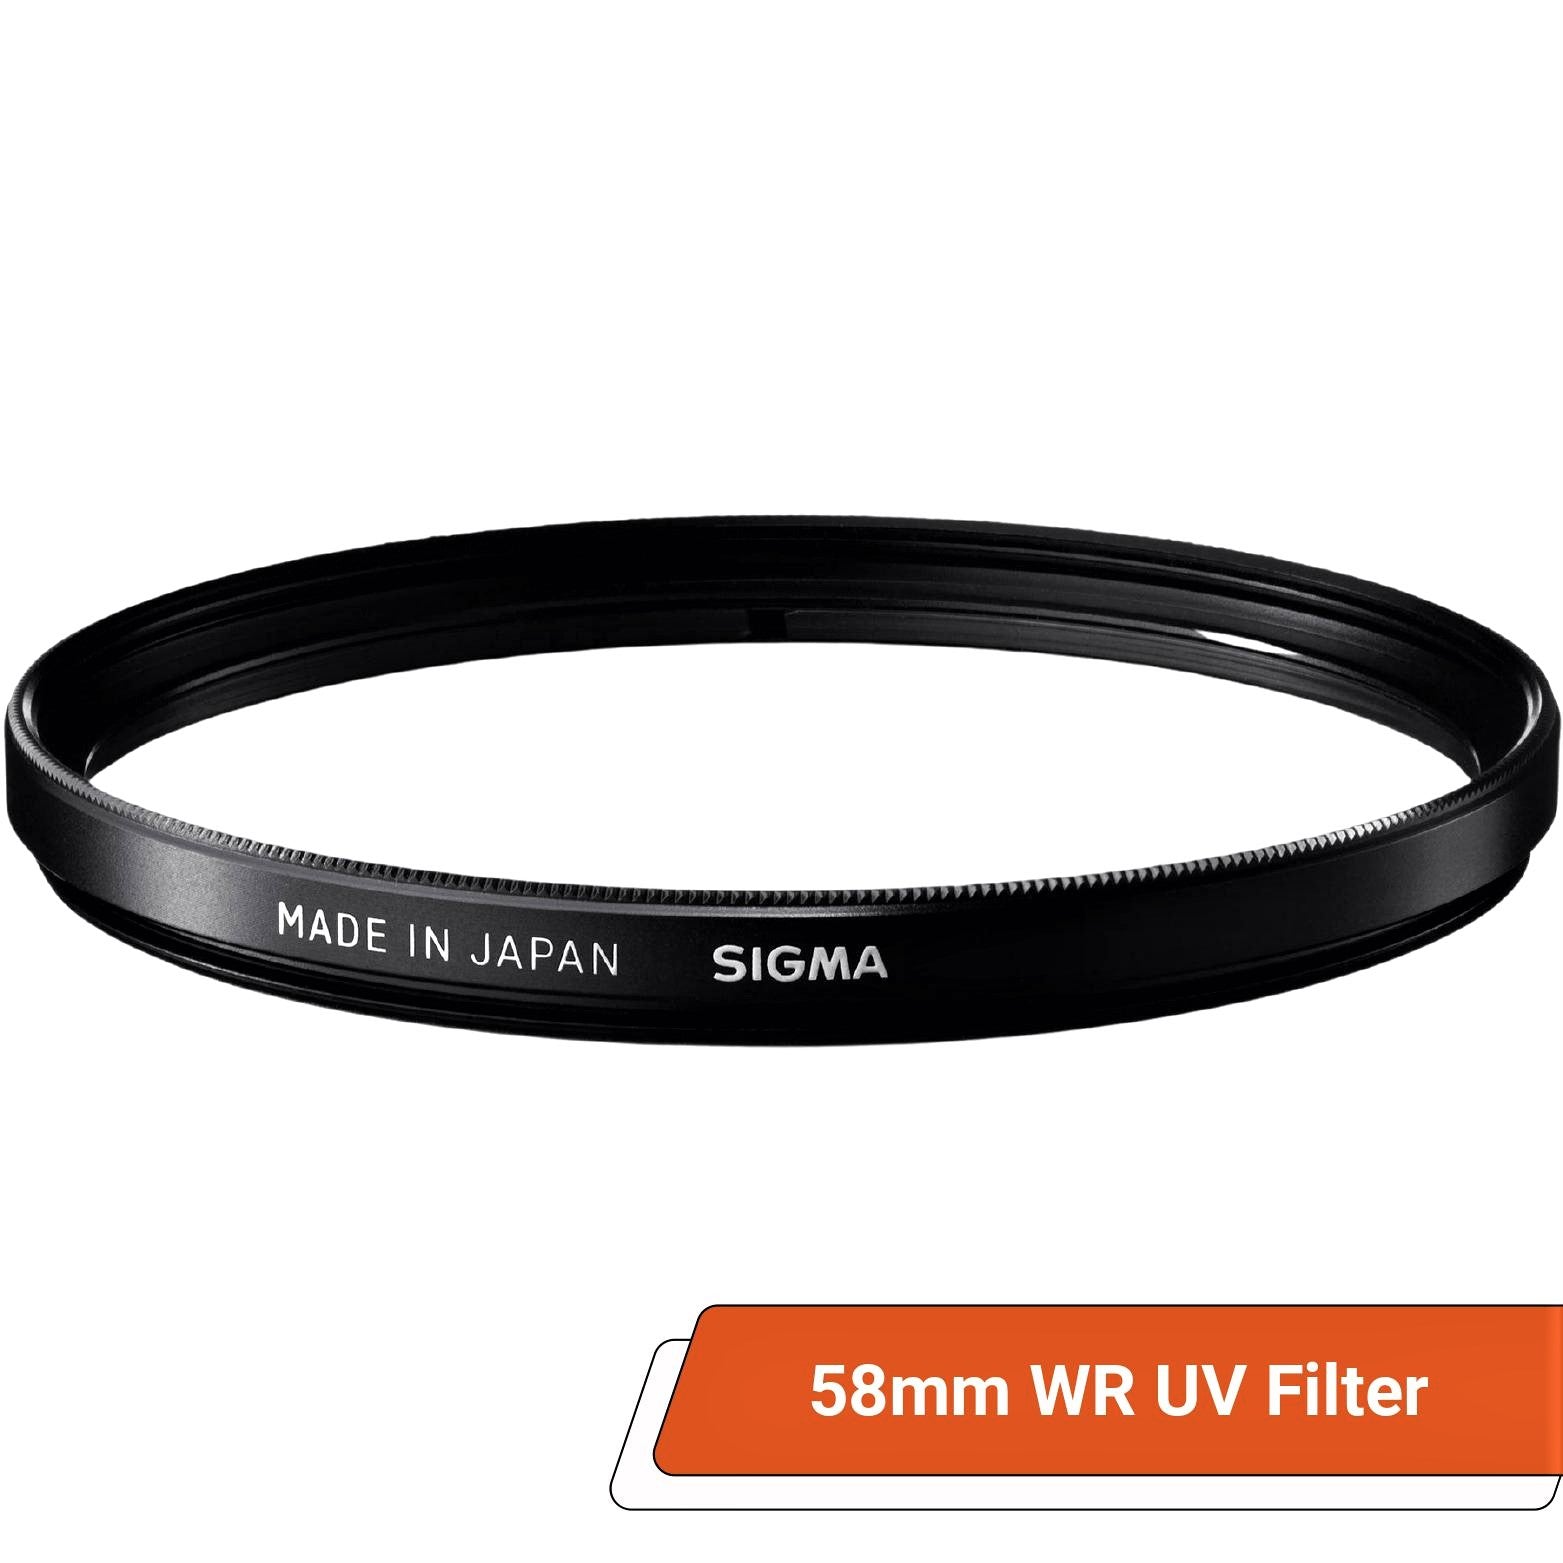 Sigma 58mm WR (Water Repellent) UV Filter